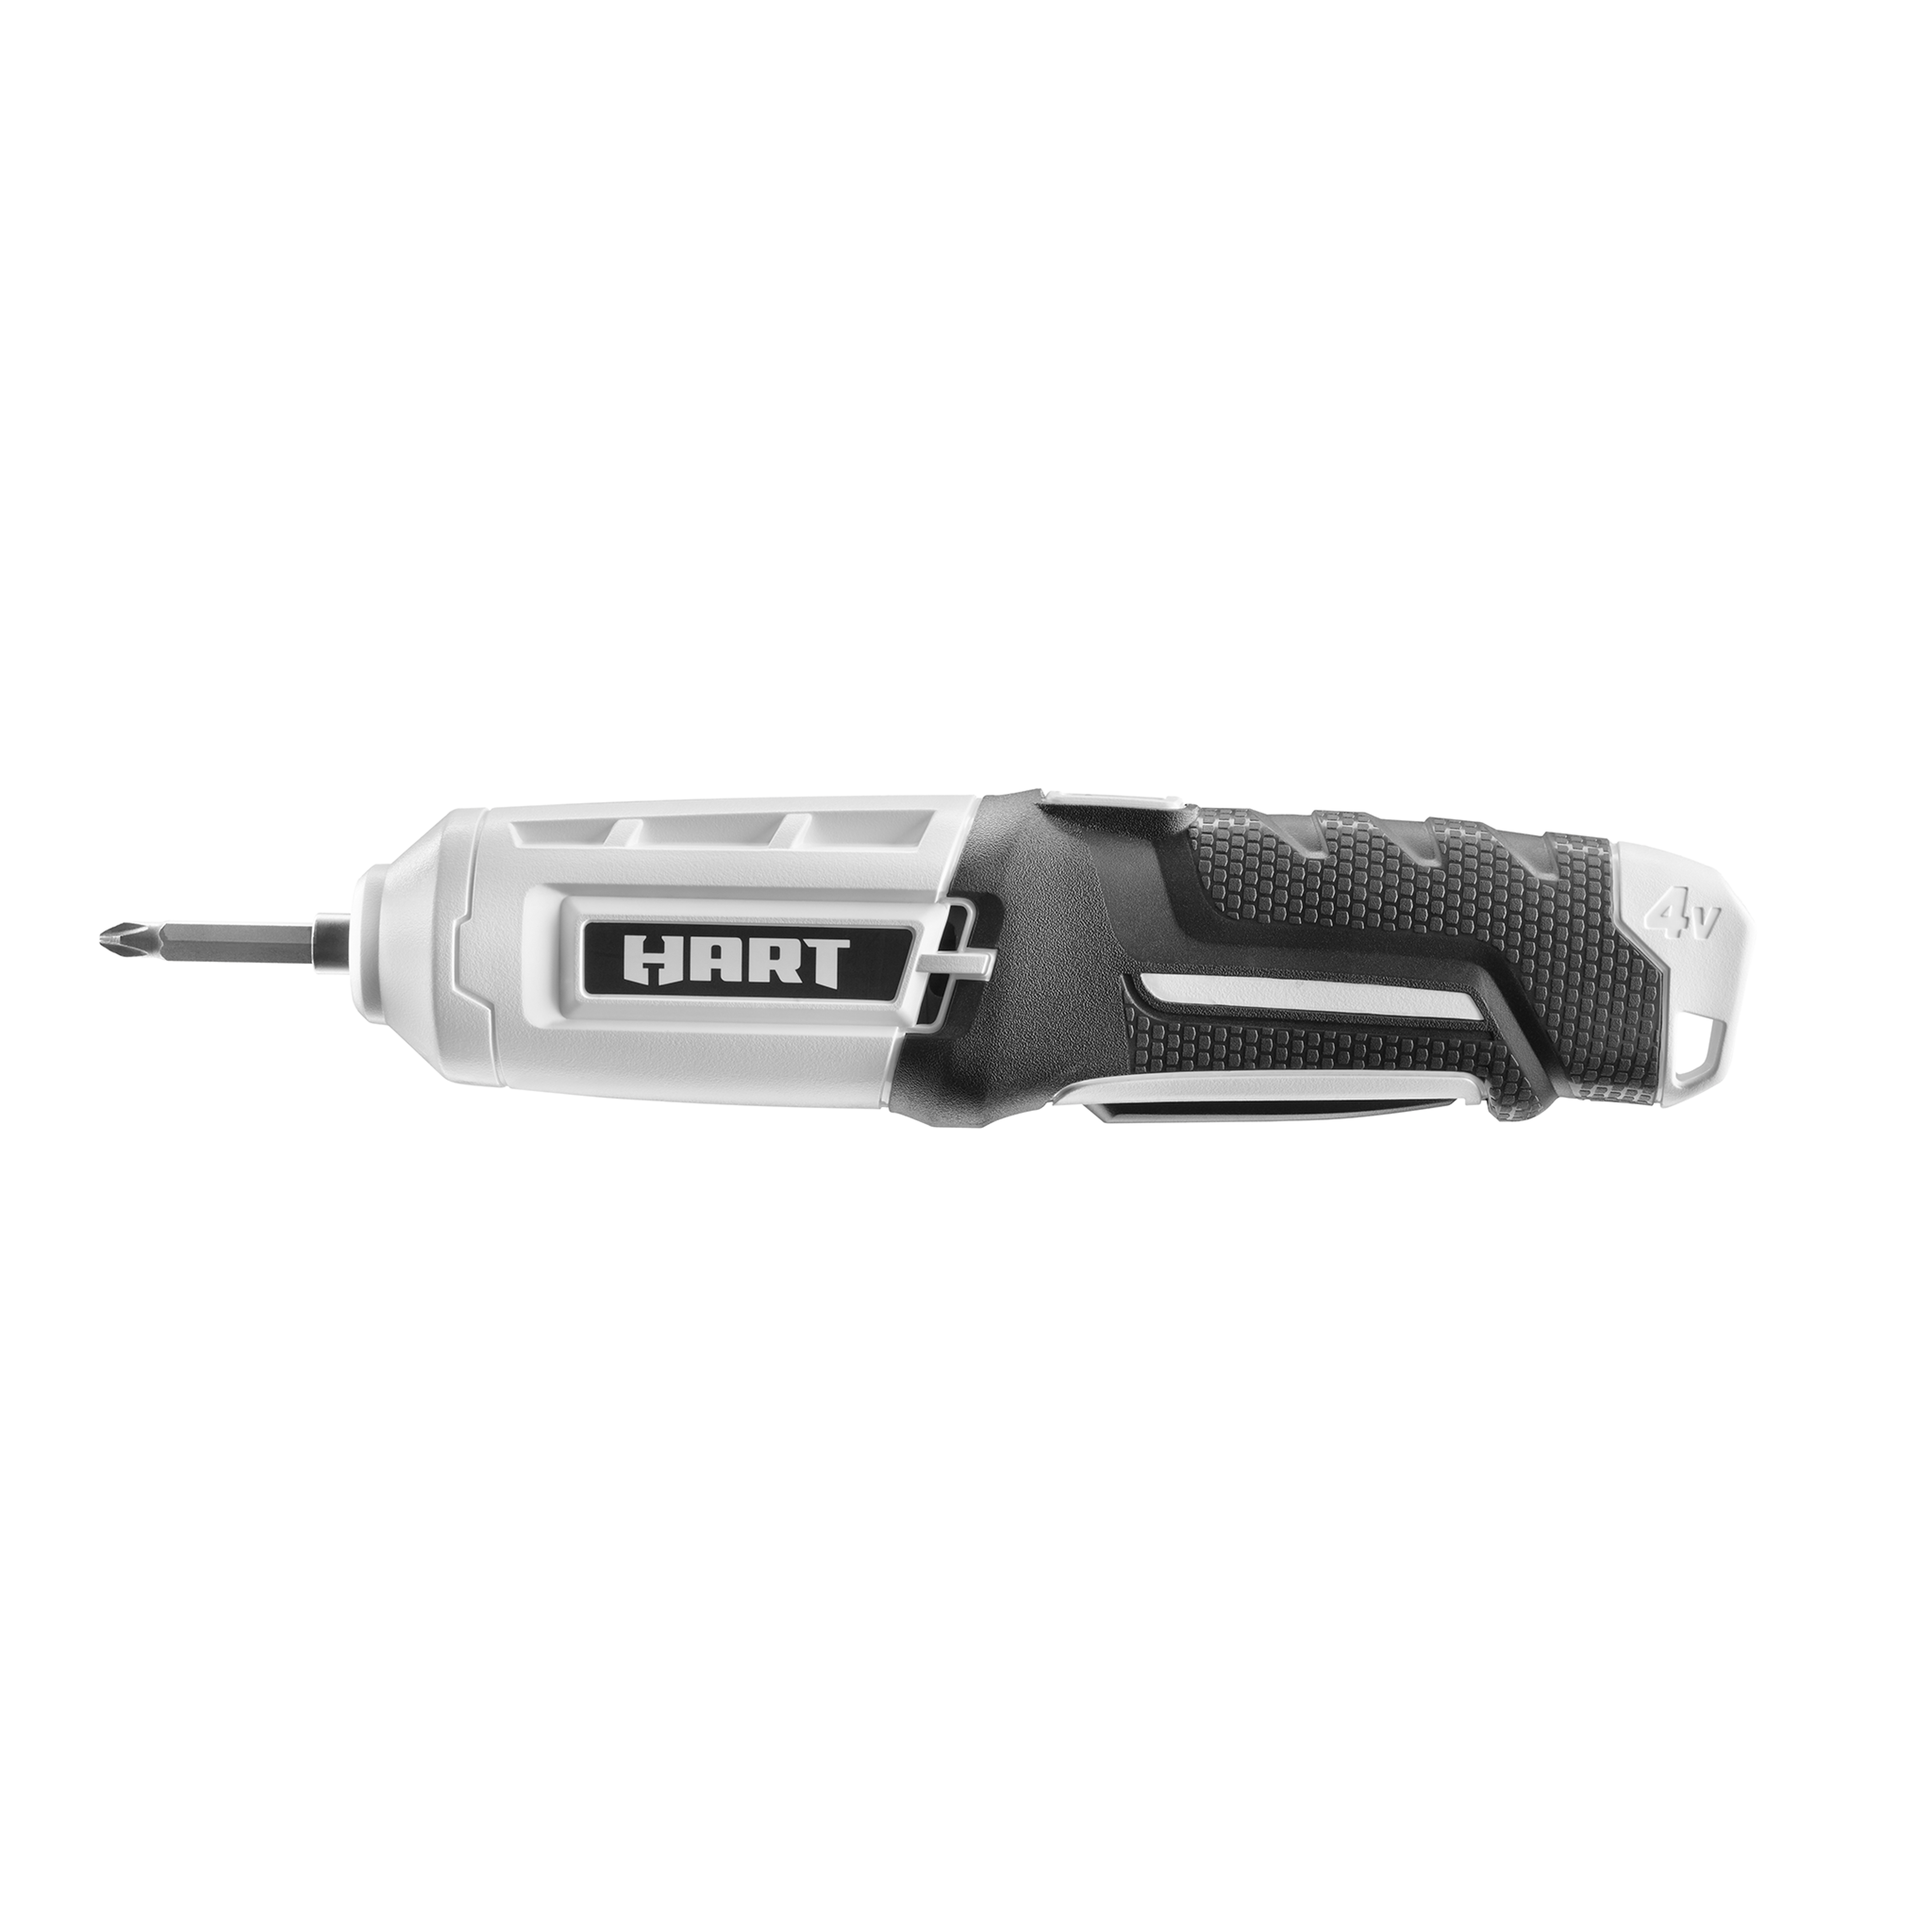 HART 4-Volt Rechargeable Screwdriver with Philips and Slotted Bit - image 3 of 6